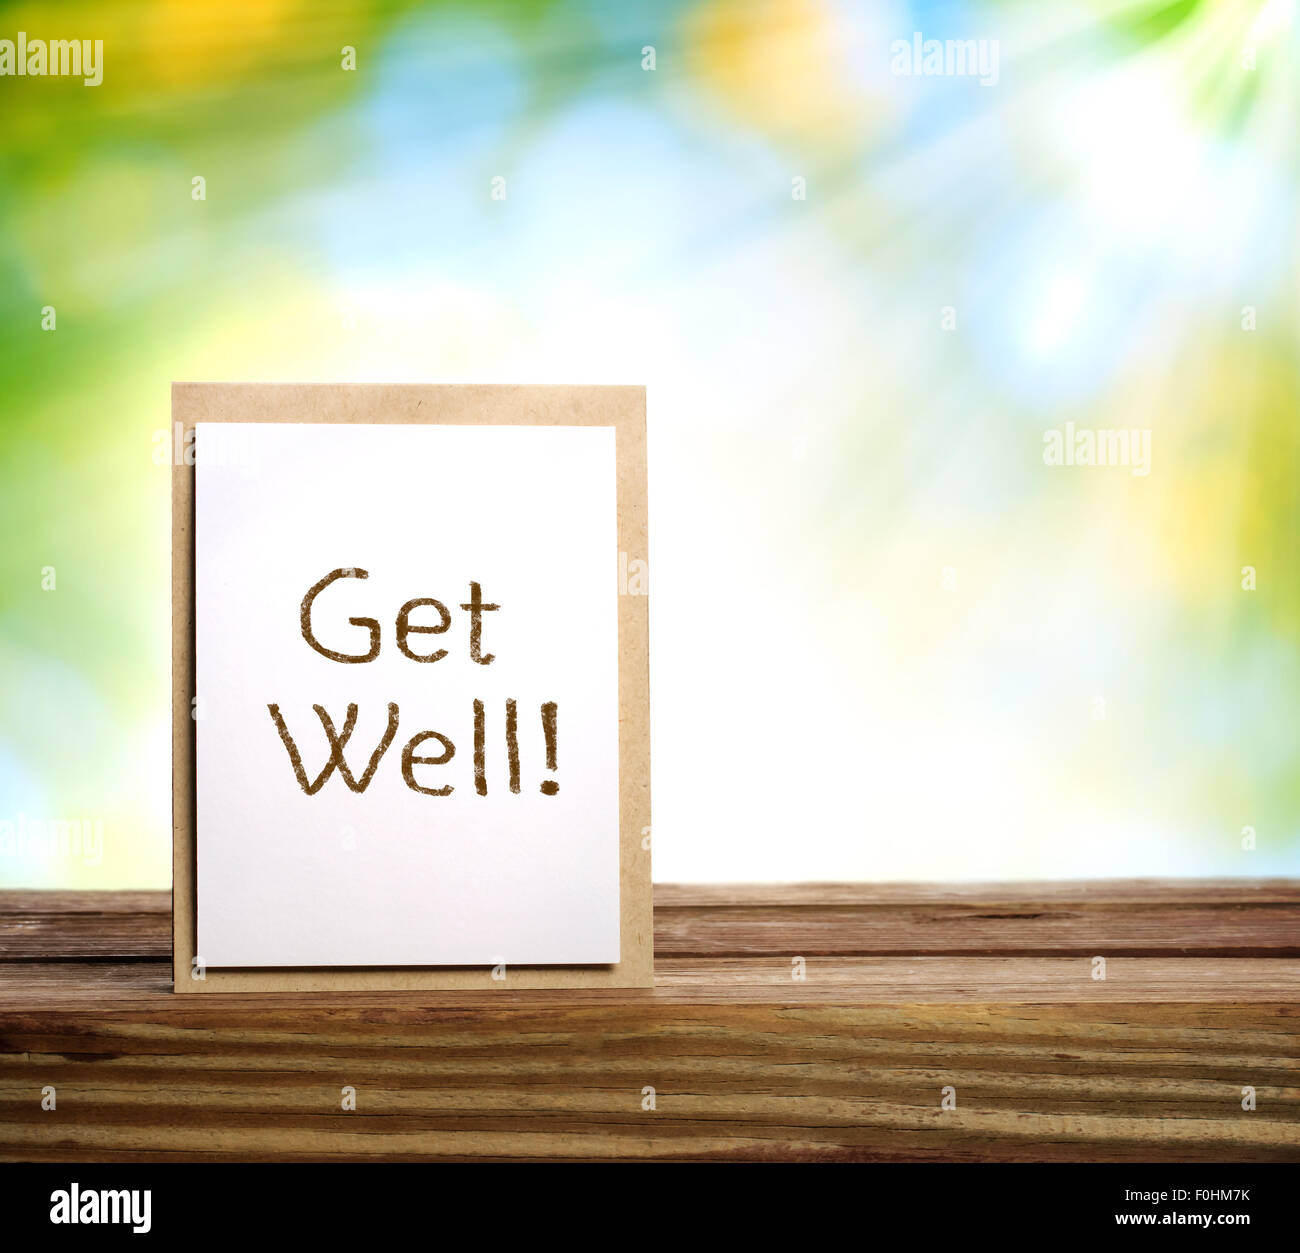 Get well message card over shiny leaves background Stock Photo